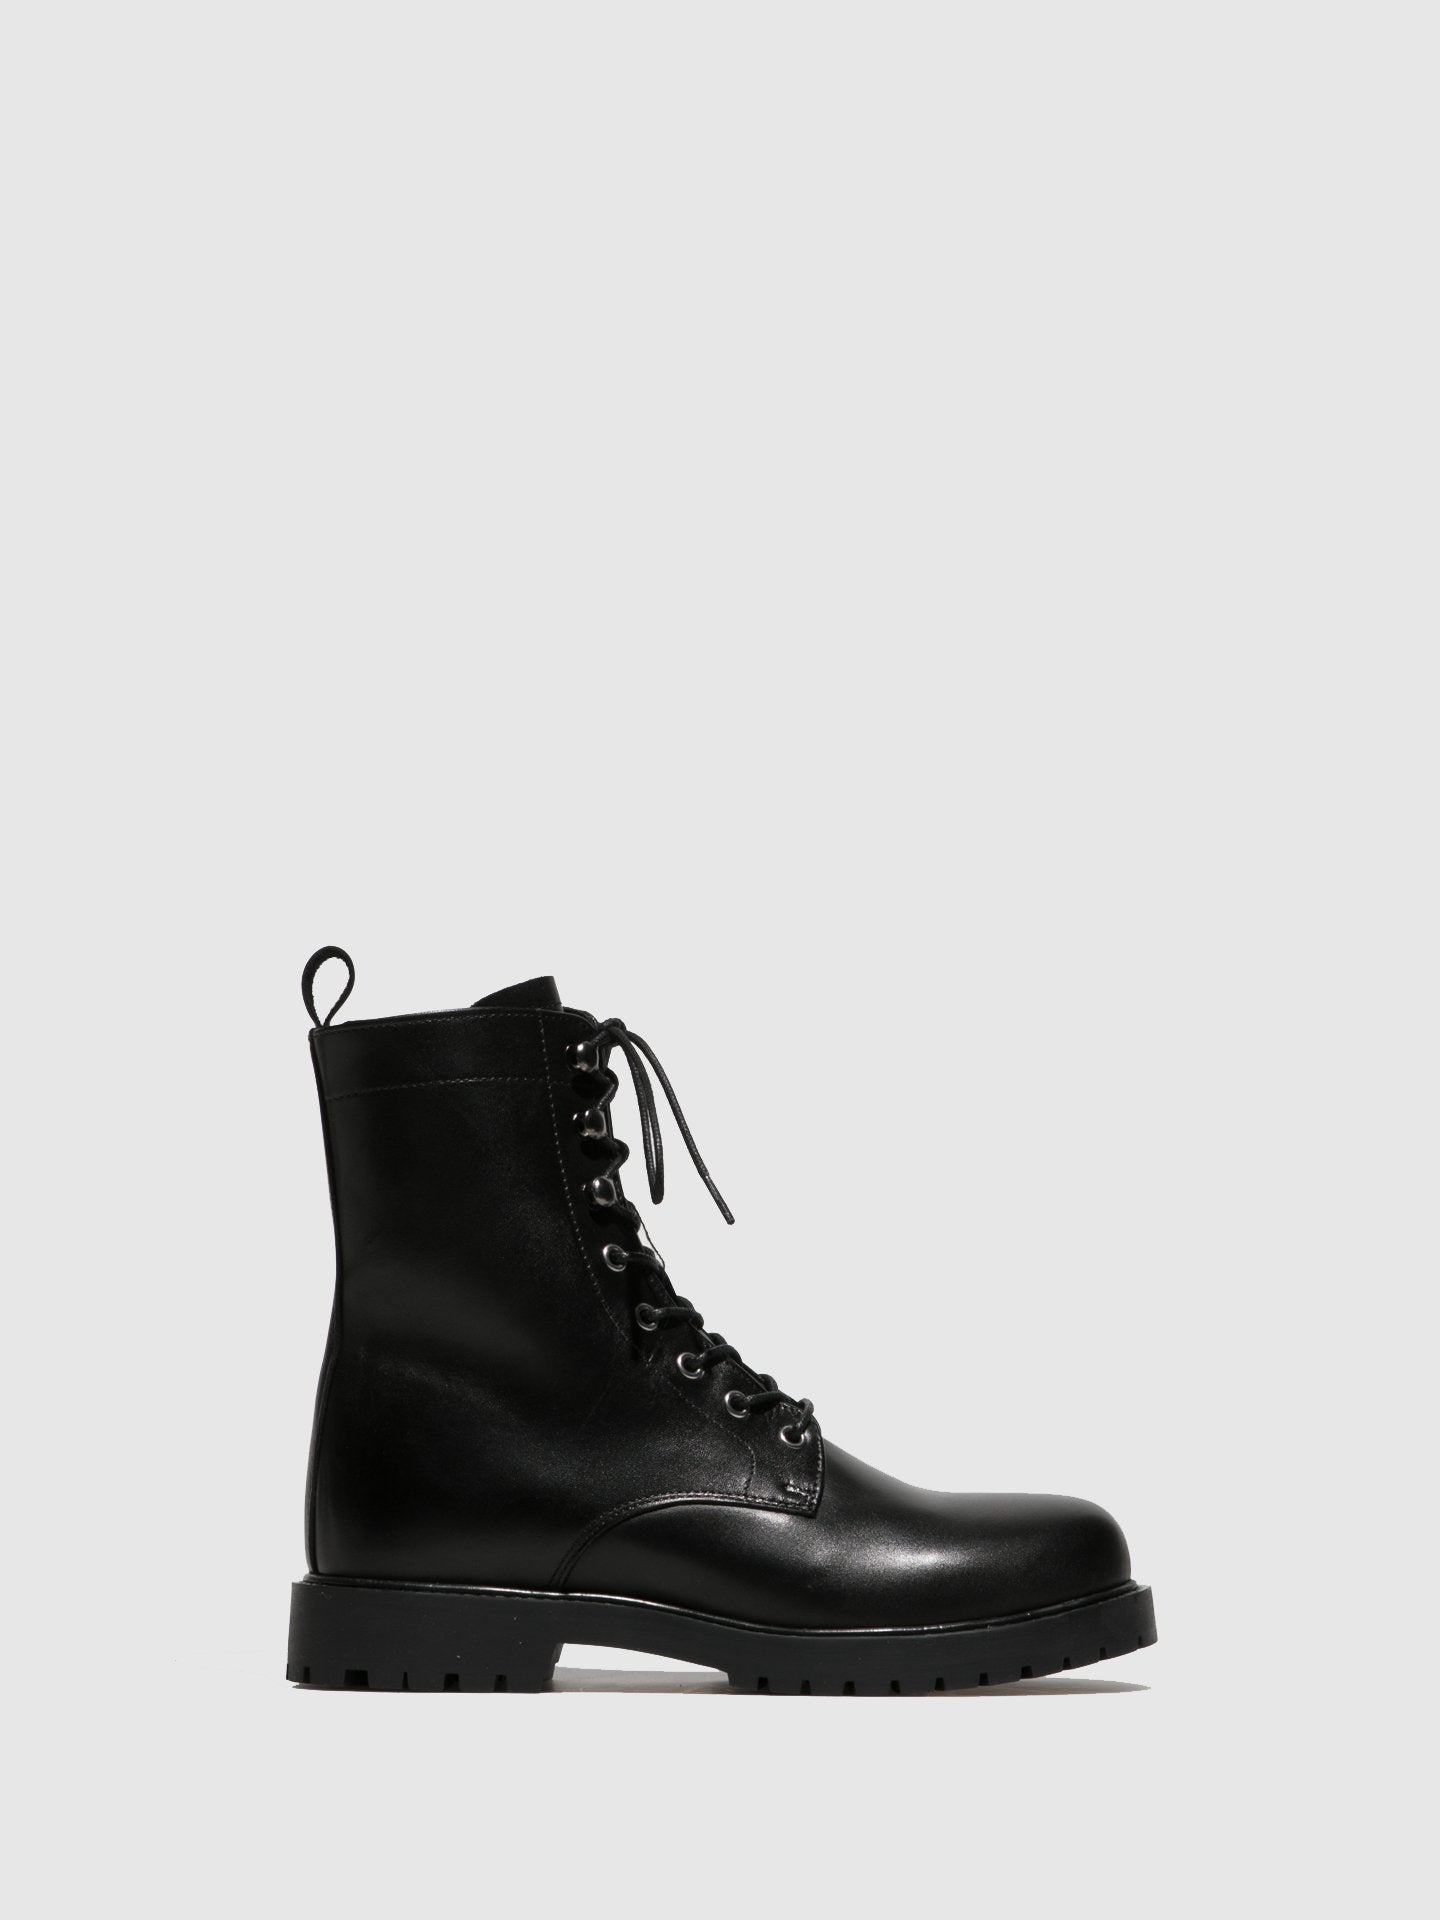 Fungi Black Lace-up Ankle Boots